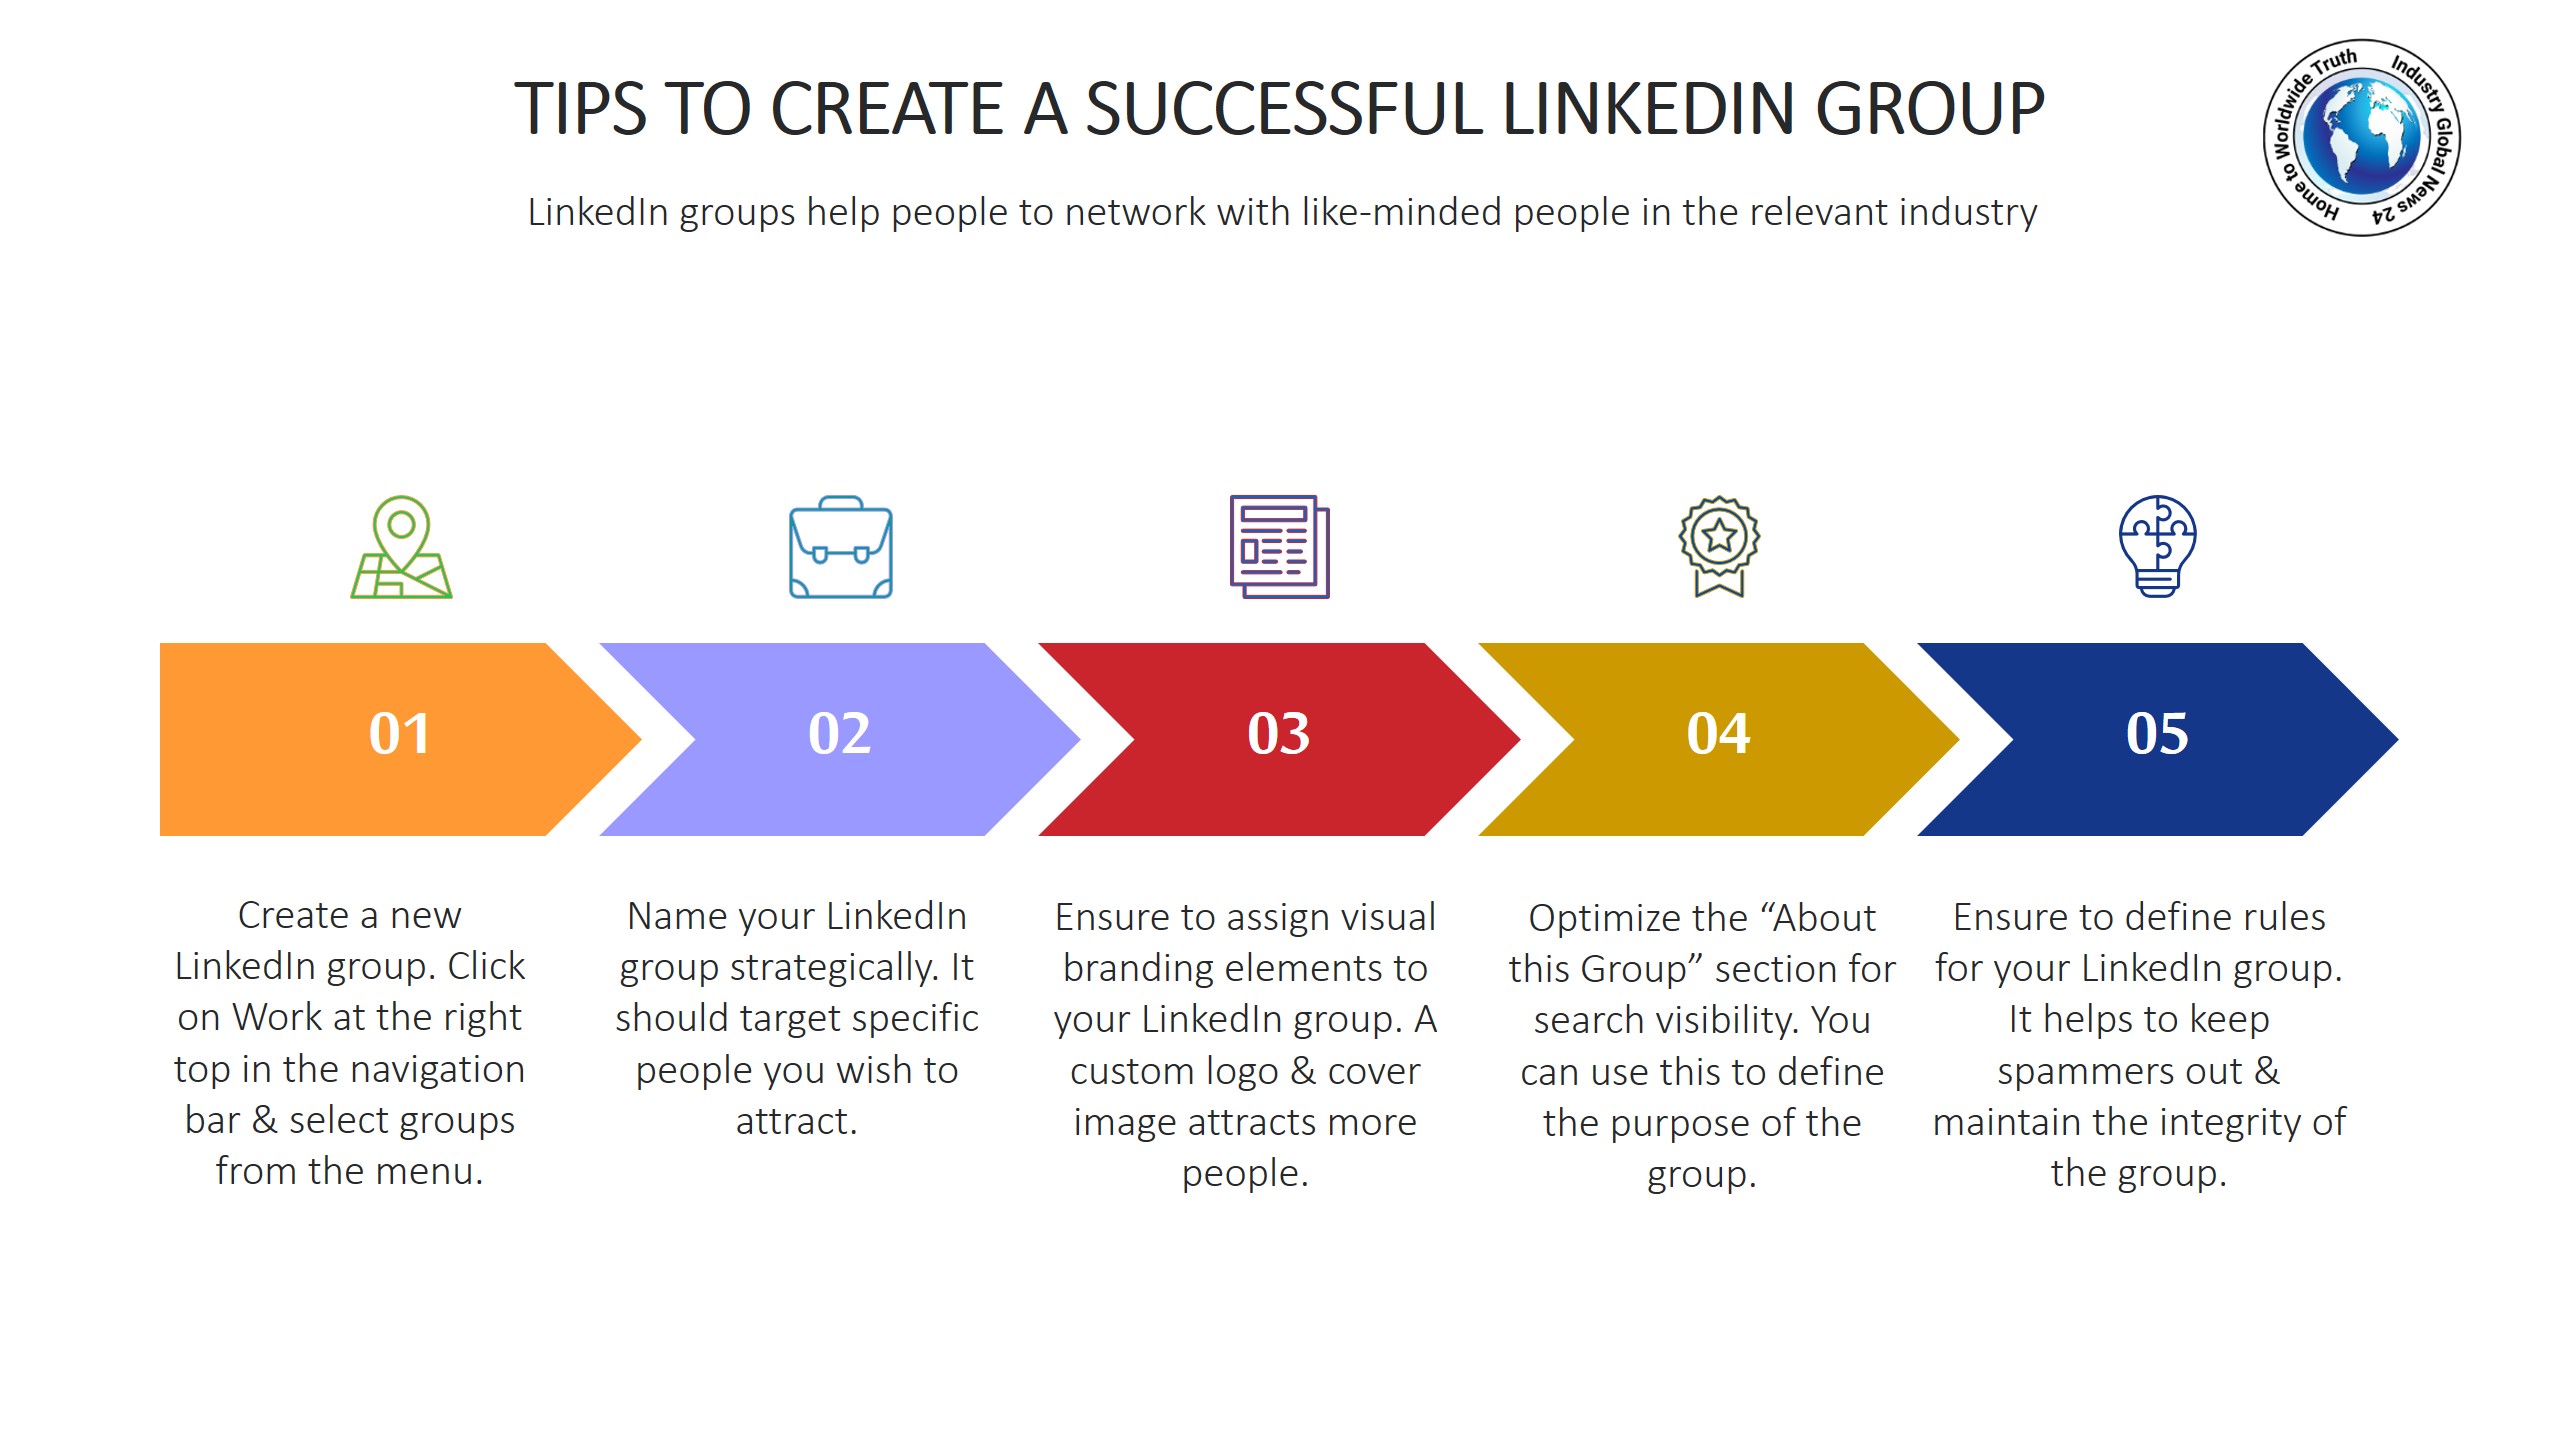 Tips to create a successful LinkedIn group